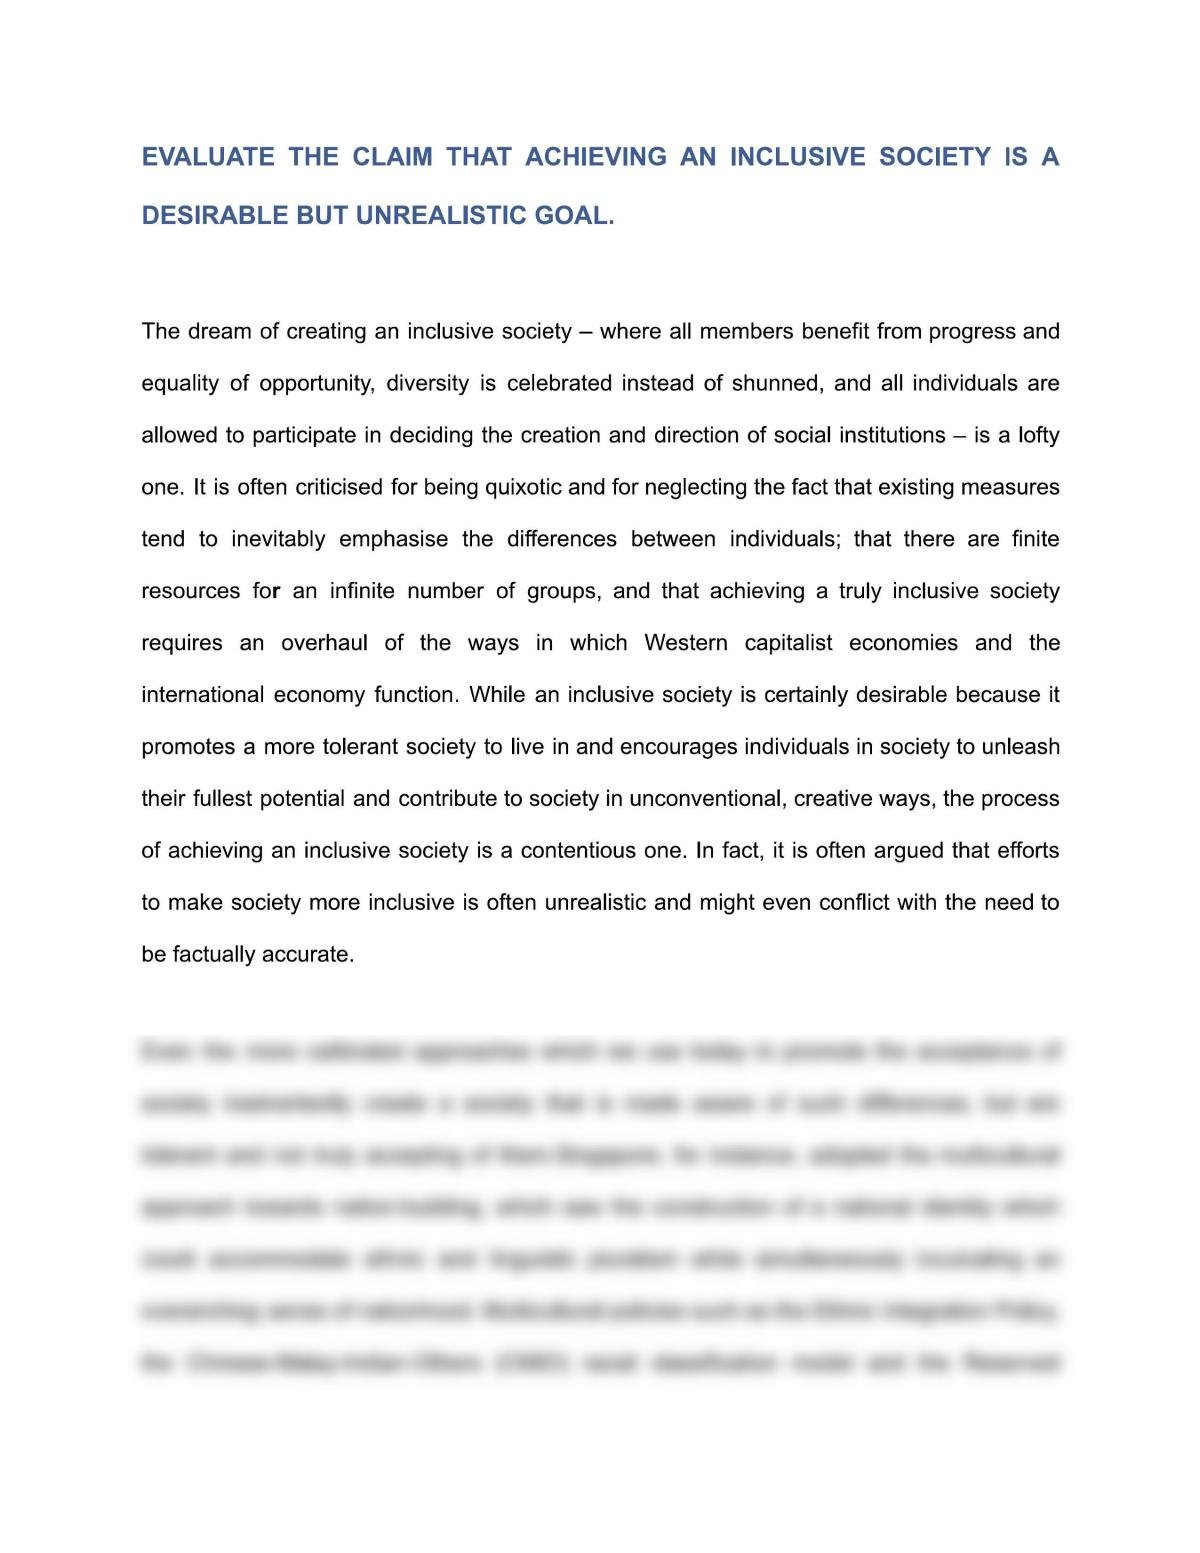 Is Achieving an Inclusive Society Unrealistic? - Page 1